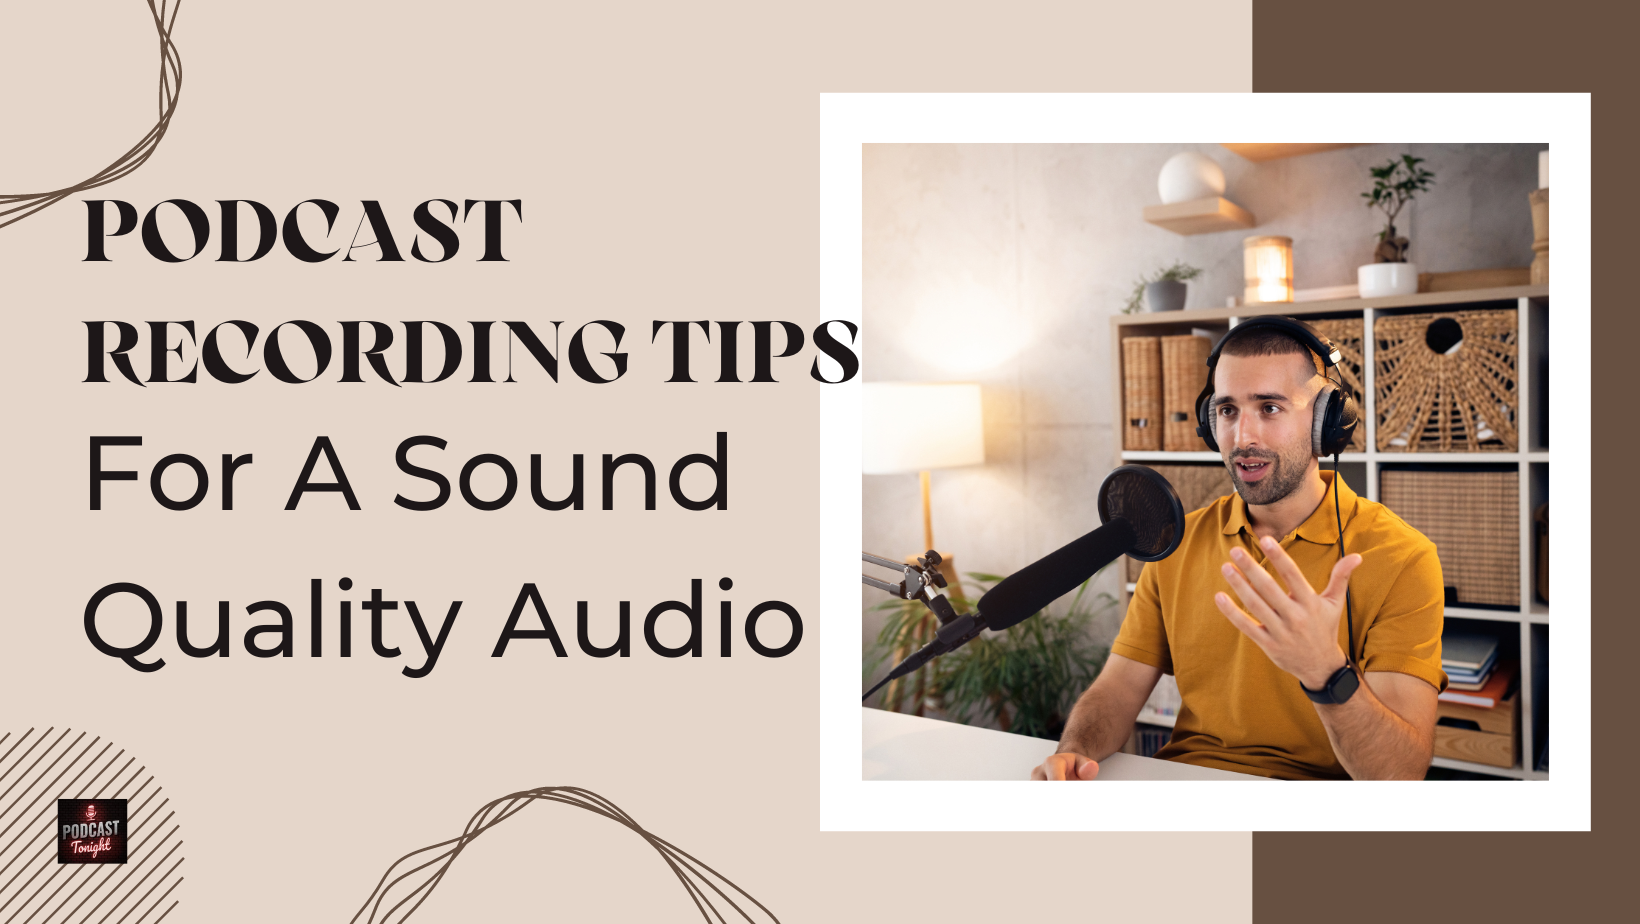 Podcast Recording Tips For A Sound Quality Audio image